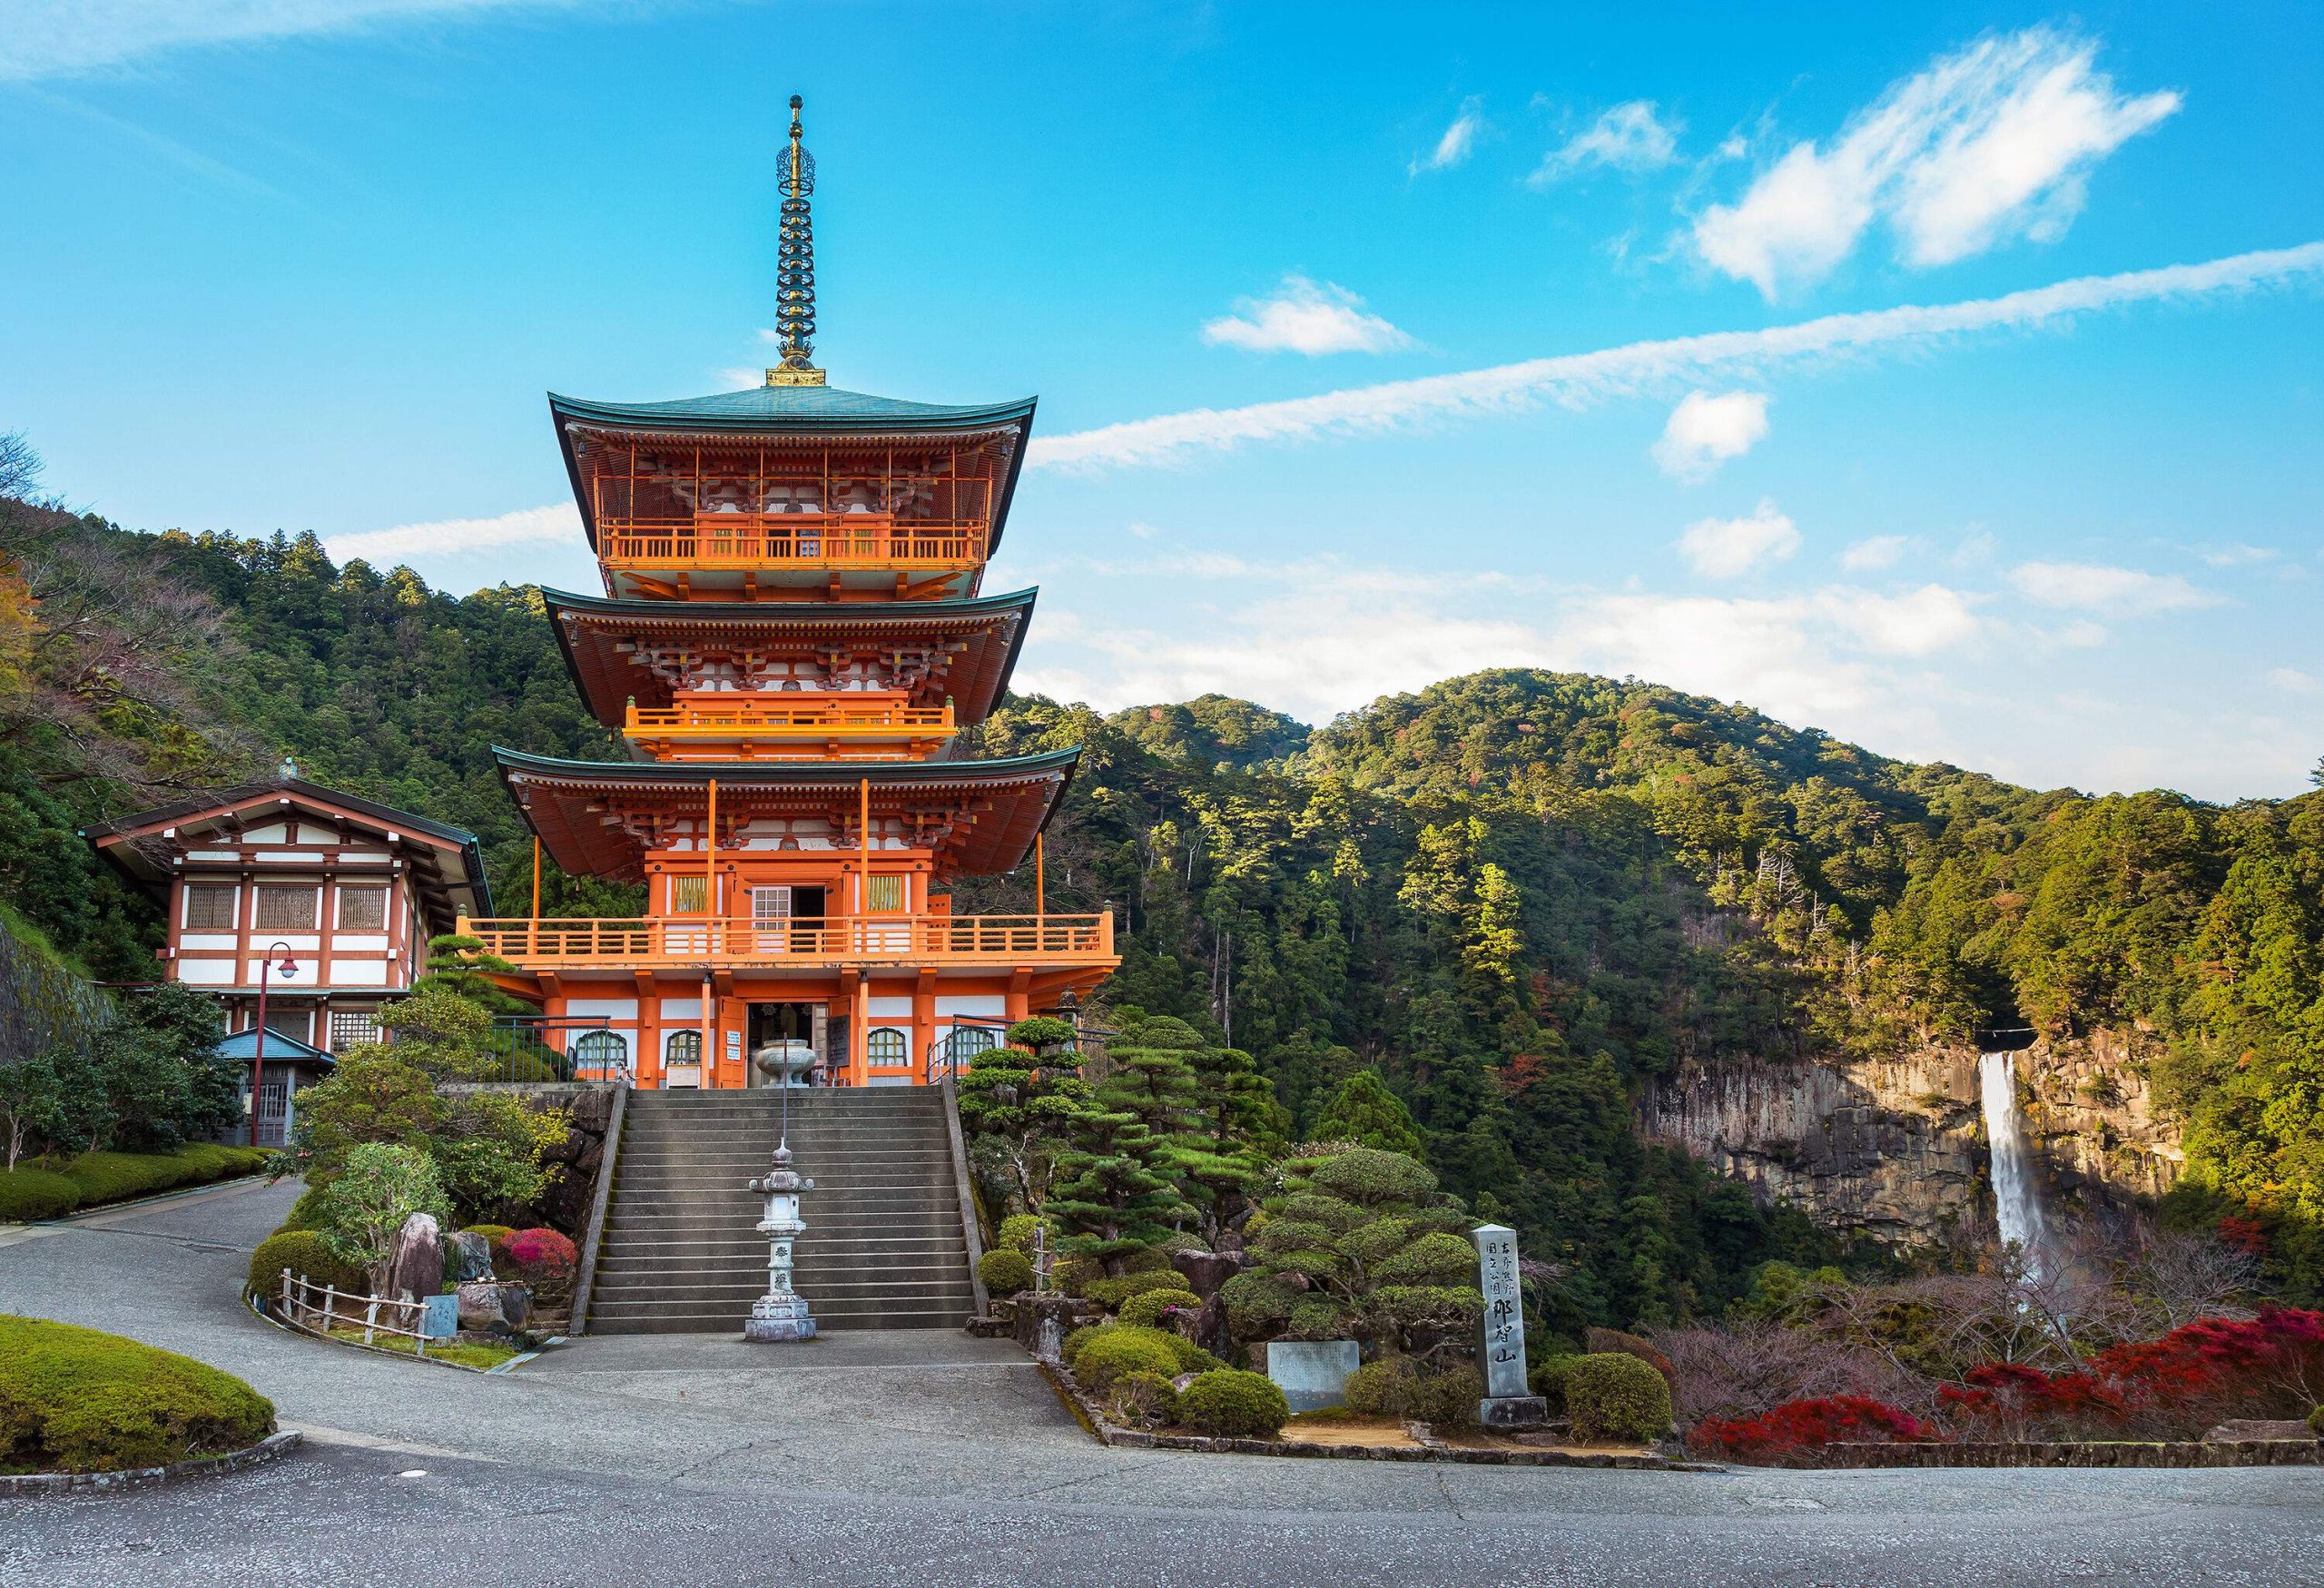 Stunning pagoda temple set against a backdrop of forested mountain range and cascading waterfalls beneath a serene cloudy blue sky.